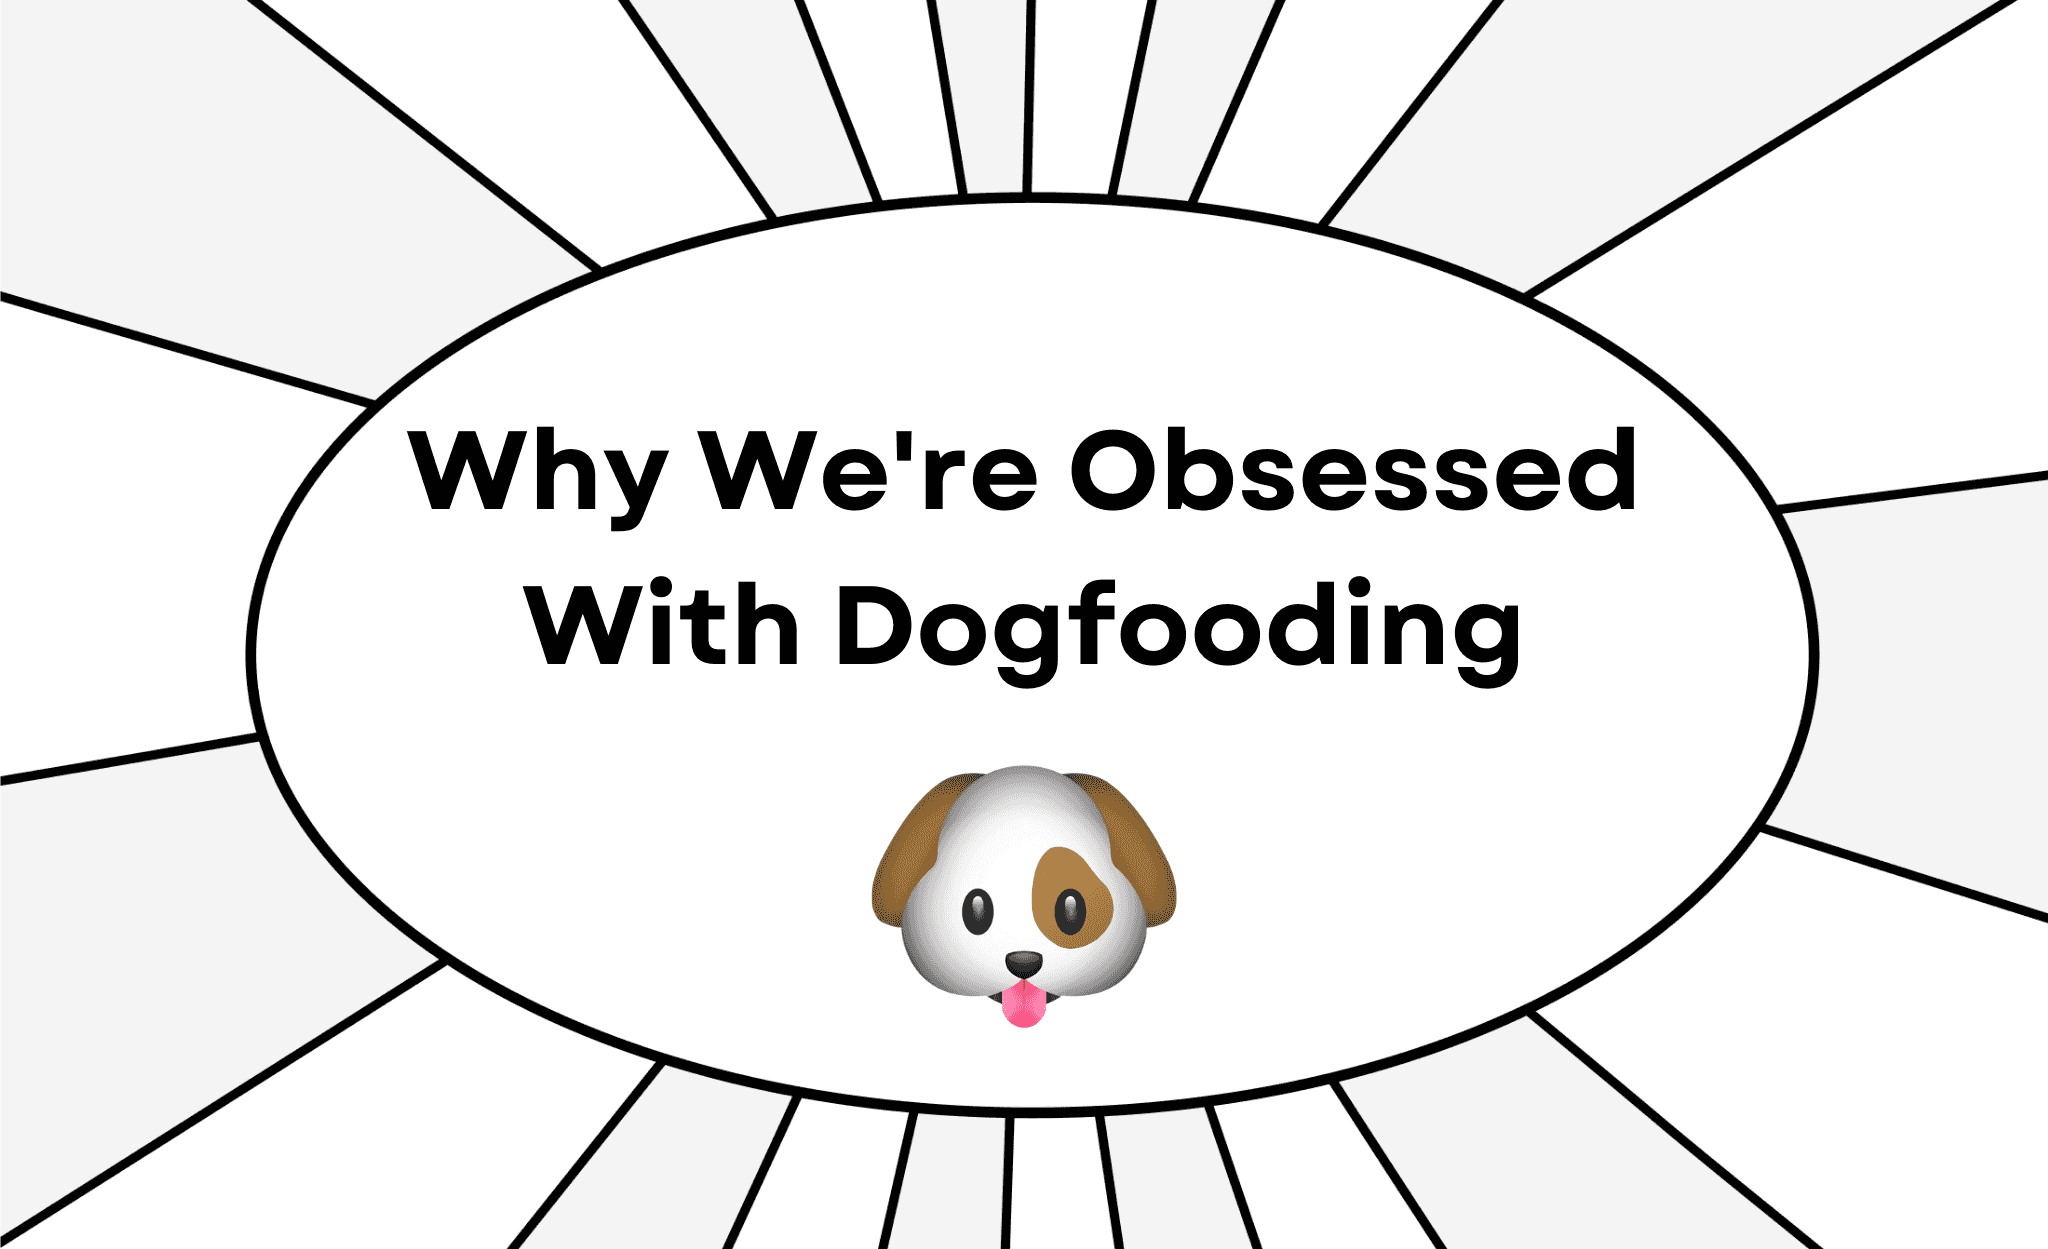 Why We're Obsessed With Dogfooding at Livecycle